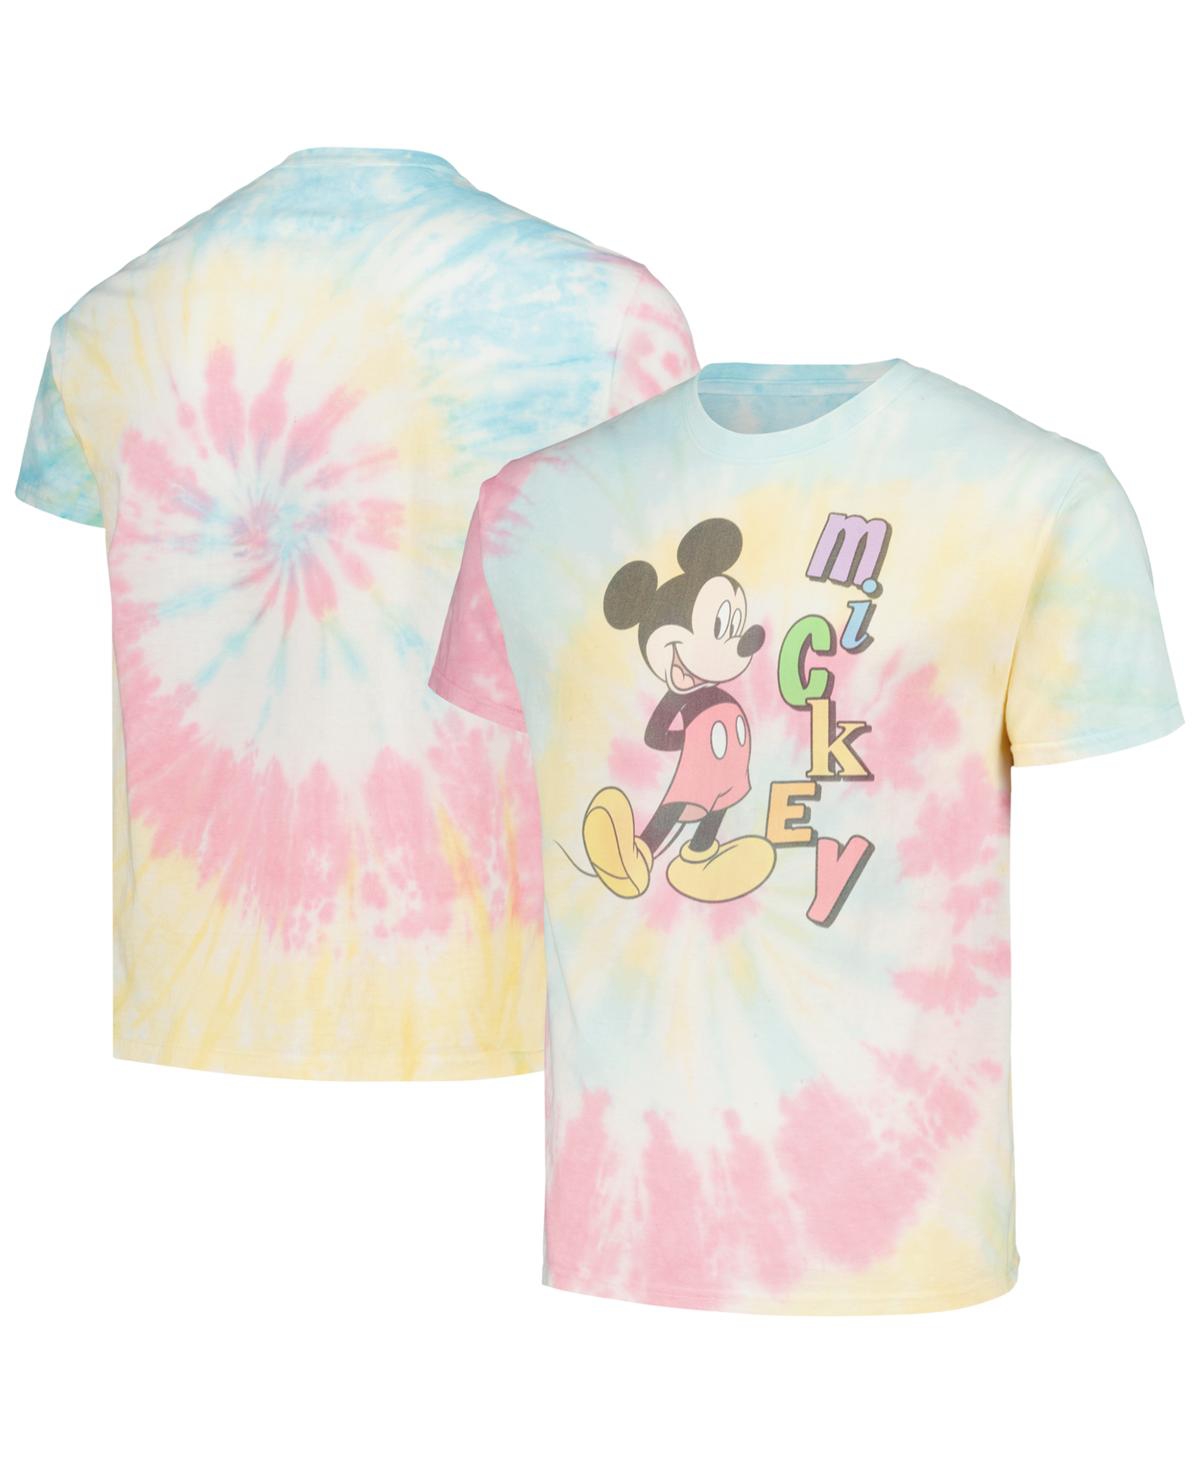 Men's and Women's Mickey and Friends Name Graphic T-shirt - Blue